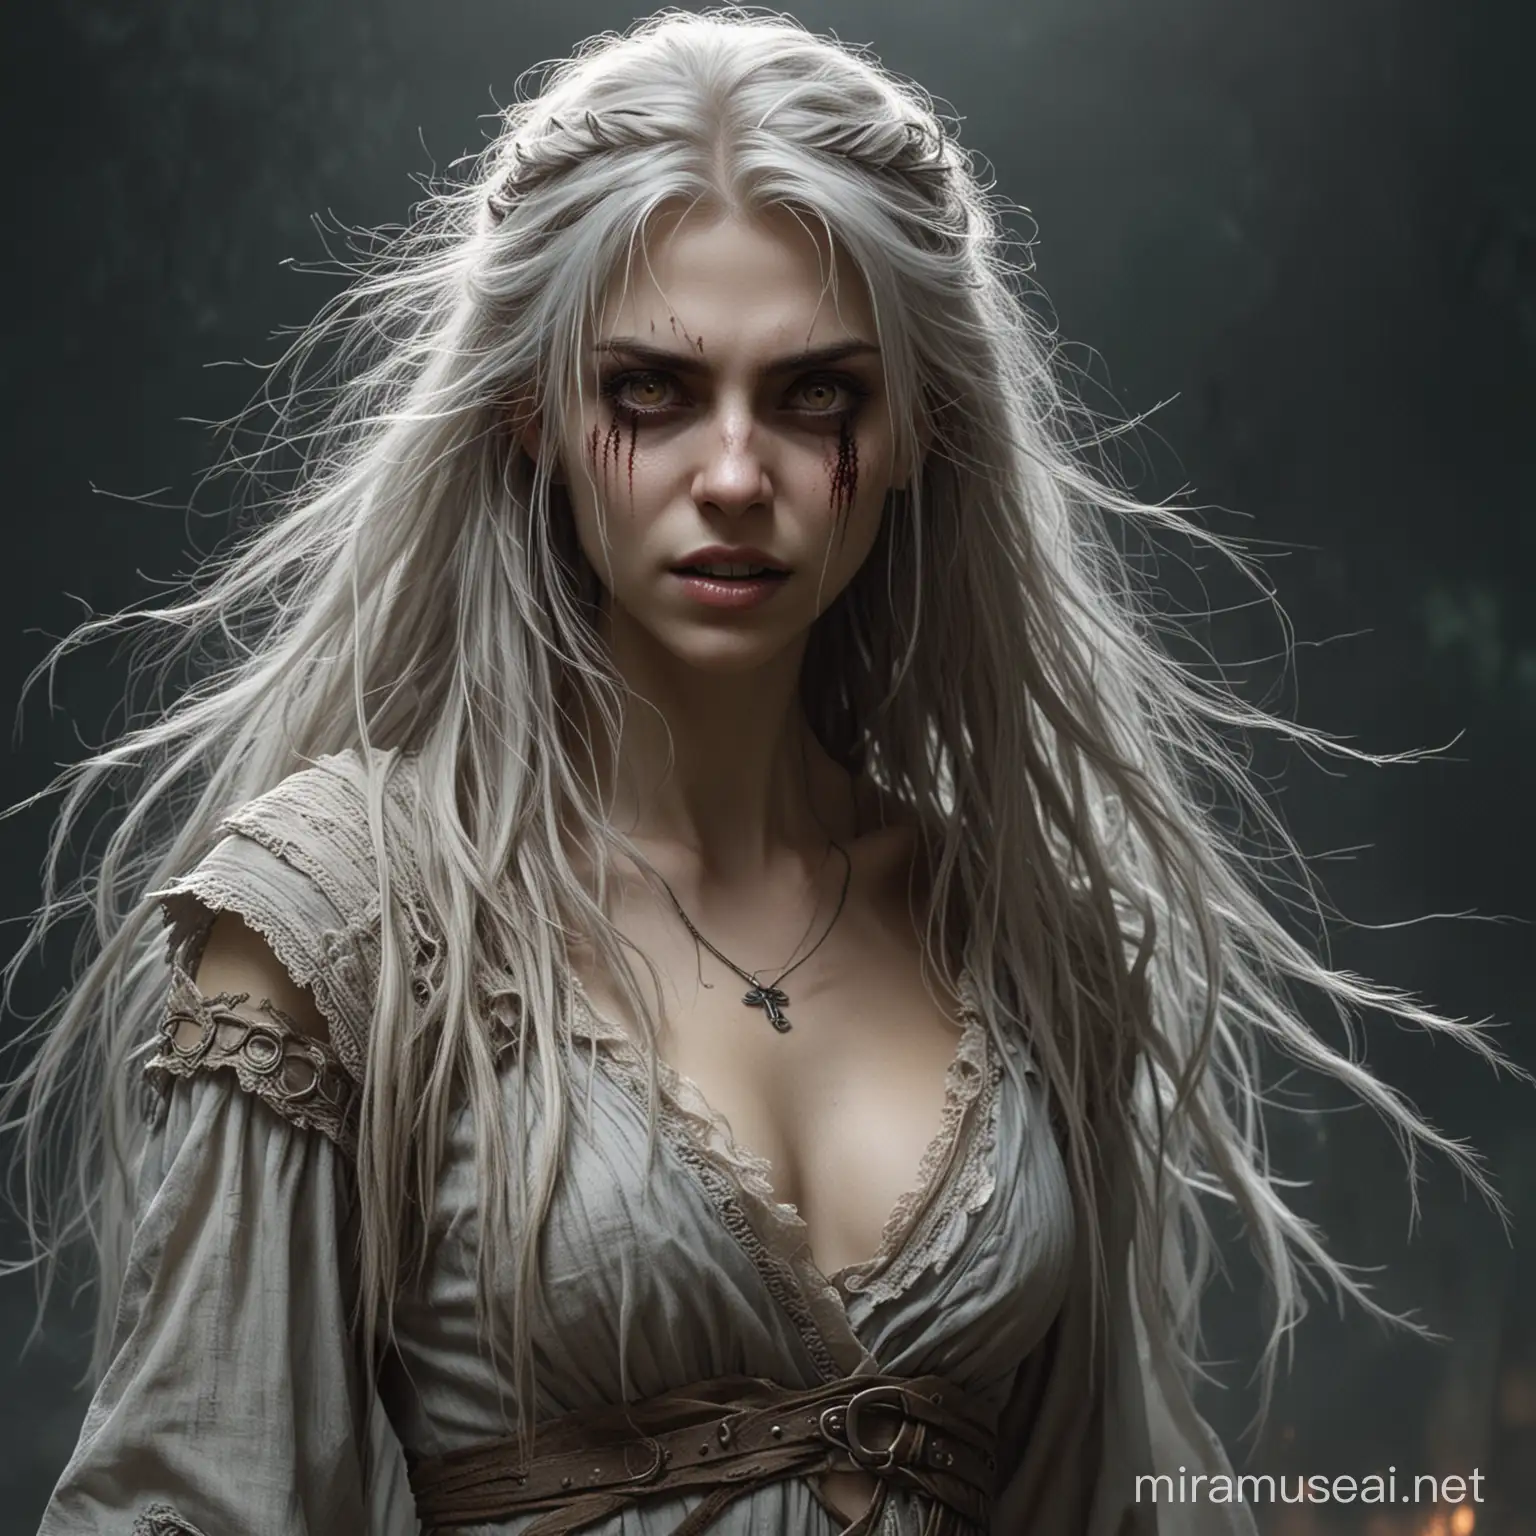 striga or ghoul or vampire, a character from the book The Witcher, an enchanted princess, a teenage girl in the form of a monster, almost naked, covered with tattered dresses, long, tangled and dirty hair, big eyes like a cat, long teeth to tear people apart, long and sharp claws like knives